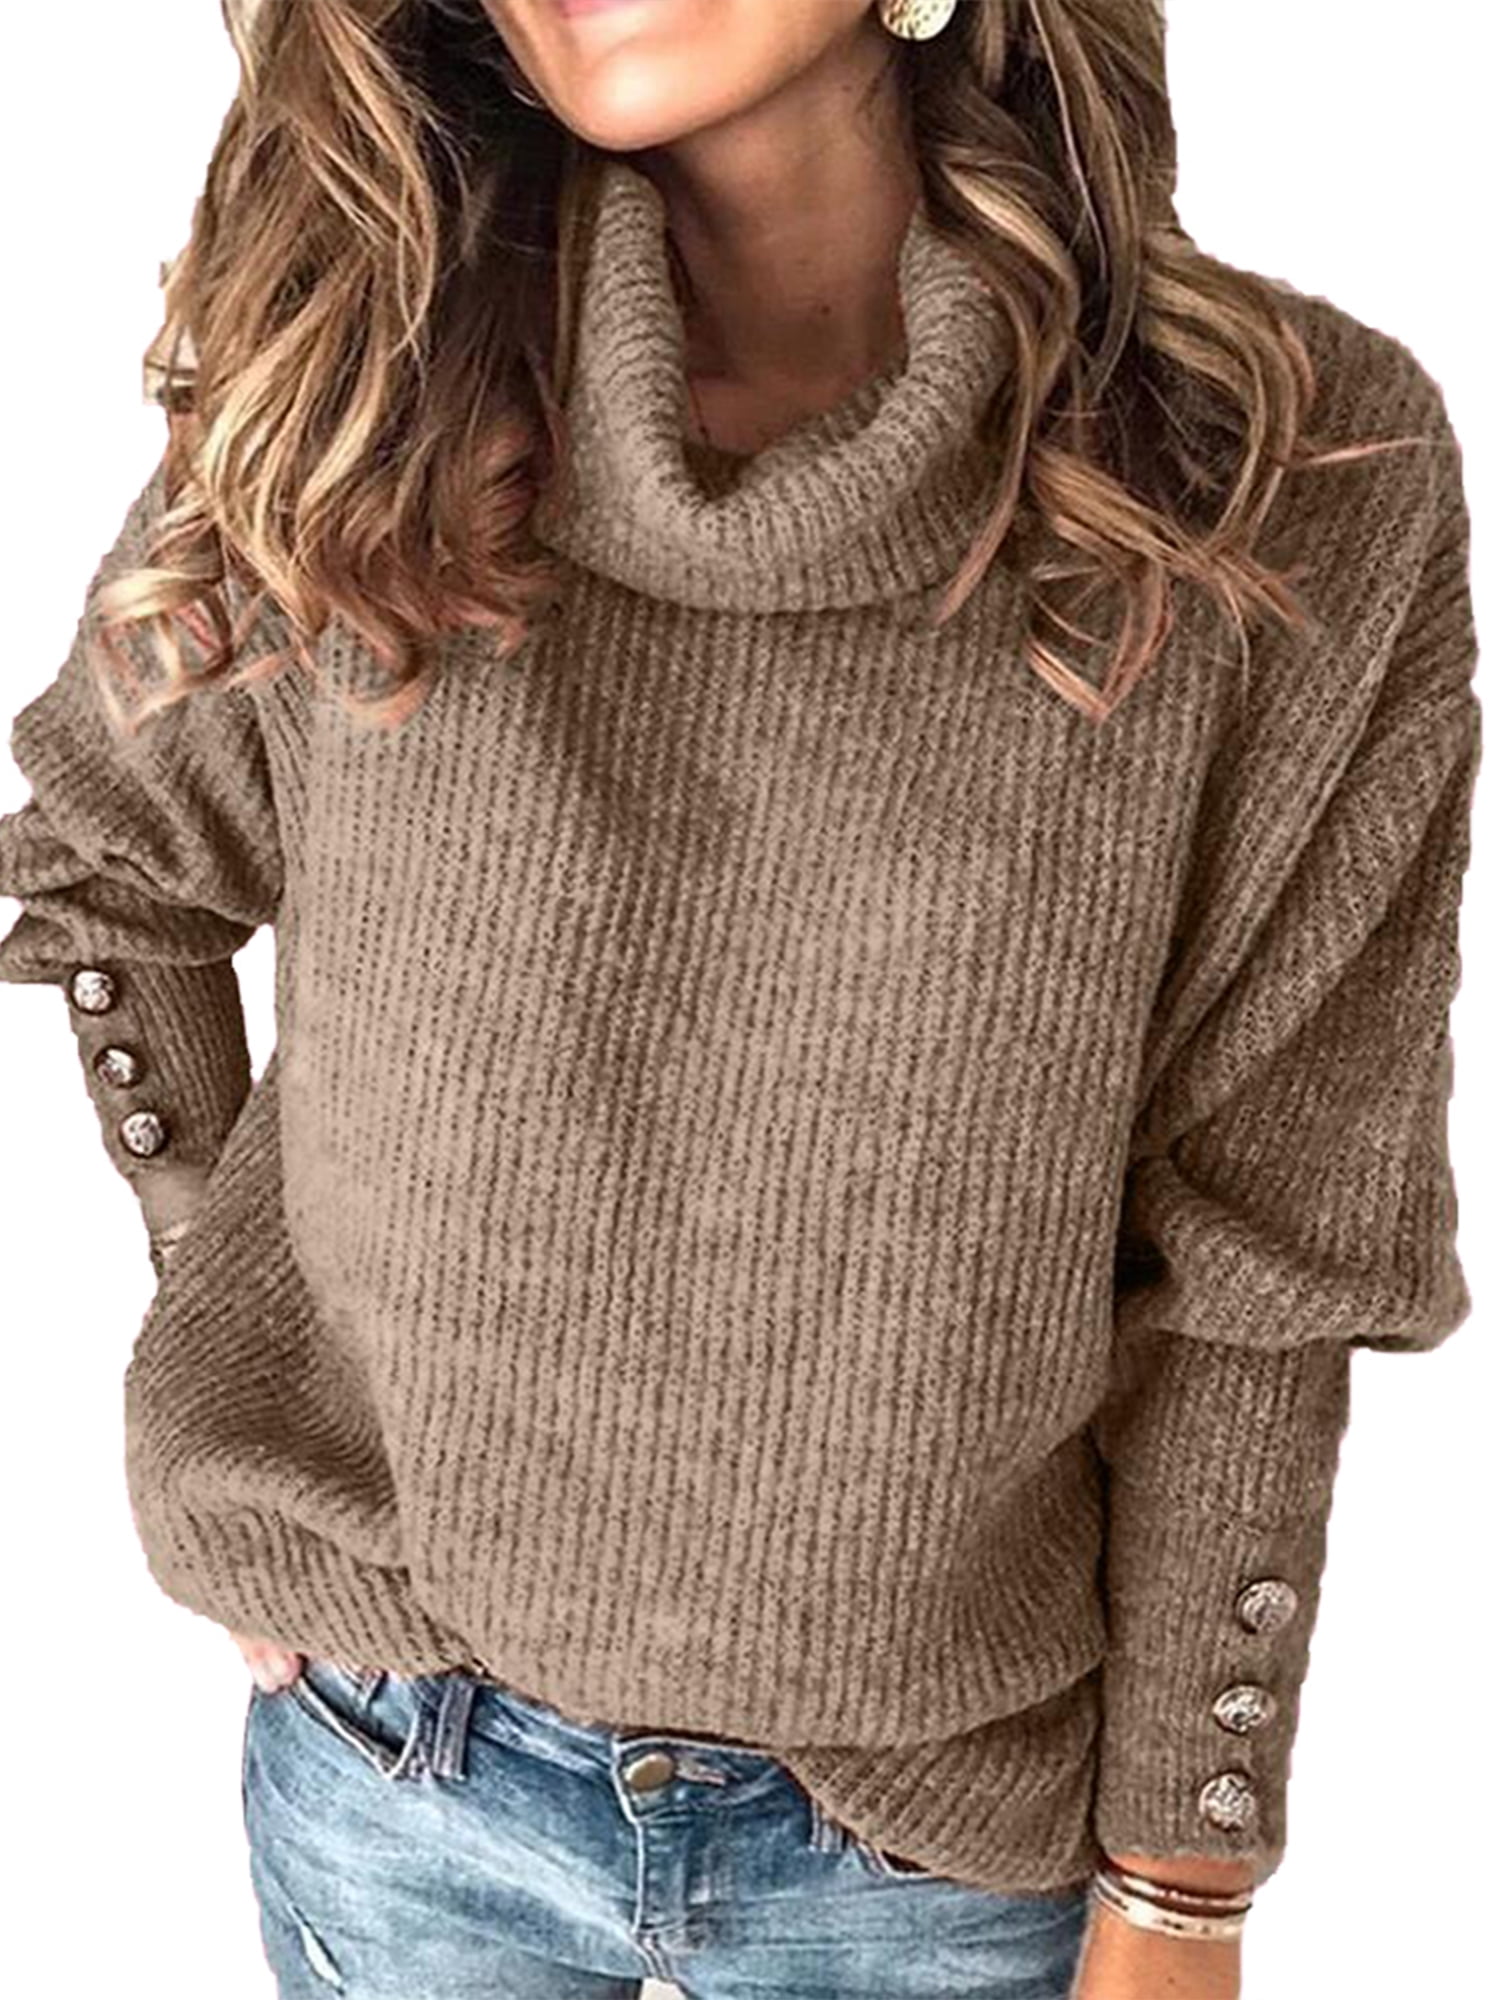 DK 2019 Womens V Neck Sweater Tops Lightweight Casual Loose Knitted Long Sleeve Pullover Jumper Tops-Hot New 